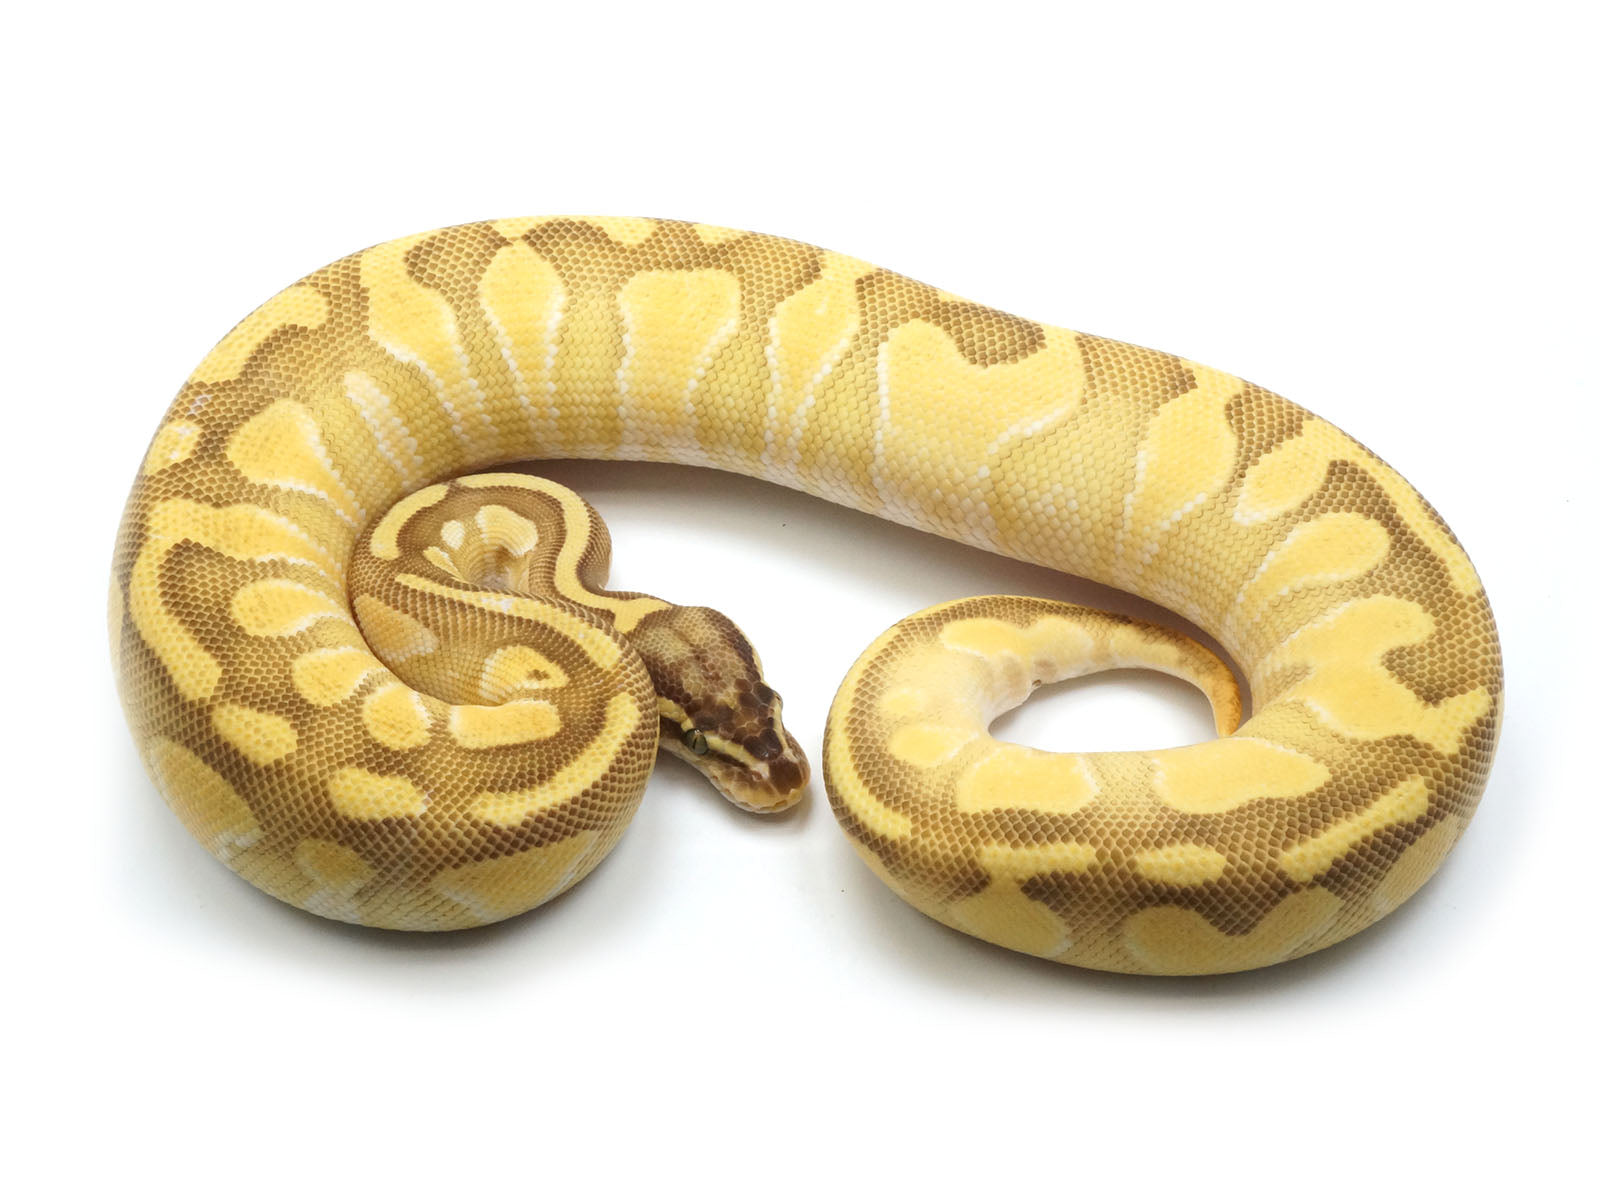 2021 Female Pastel Enchi Lesser Odium Possible Het Axanthic Possible H –  New England Reptile - NERD